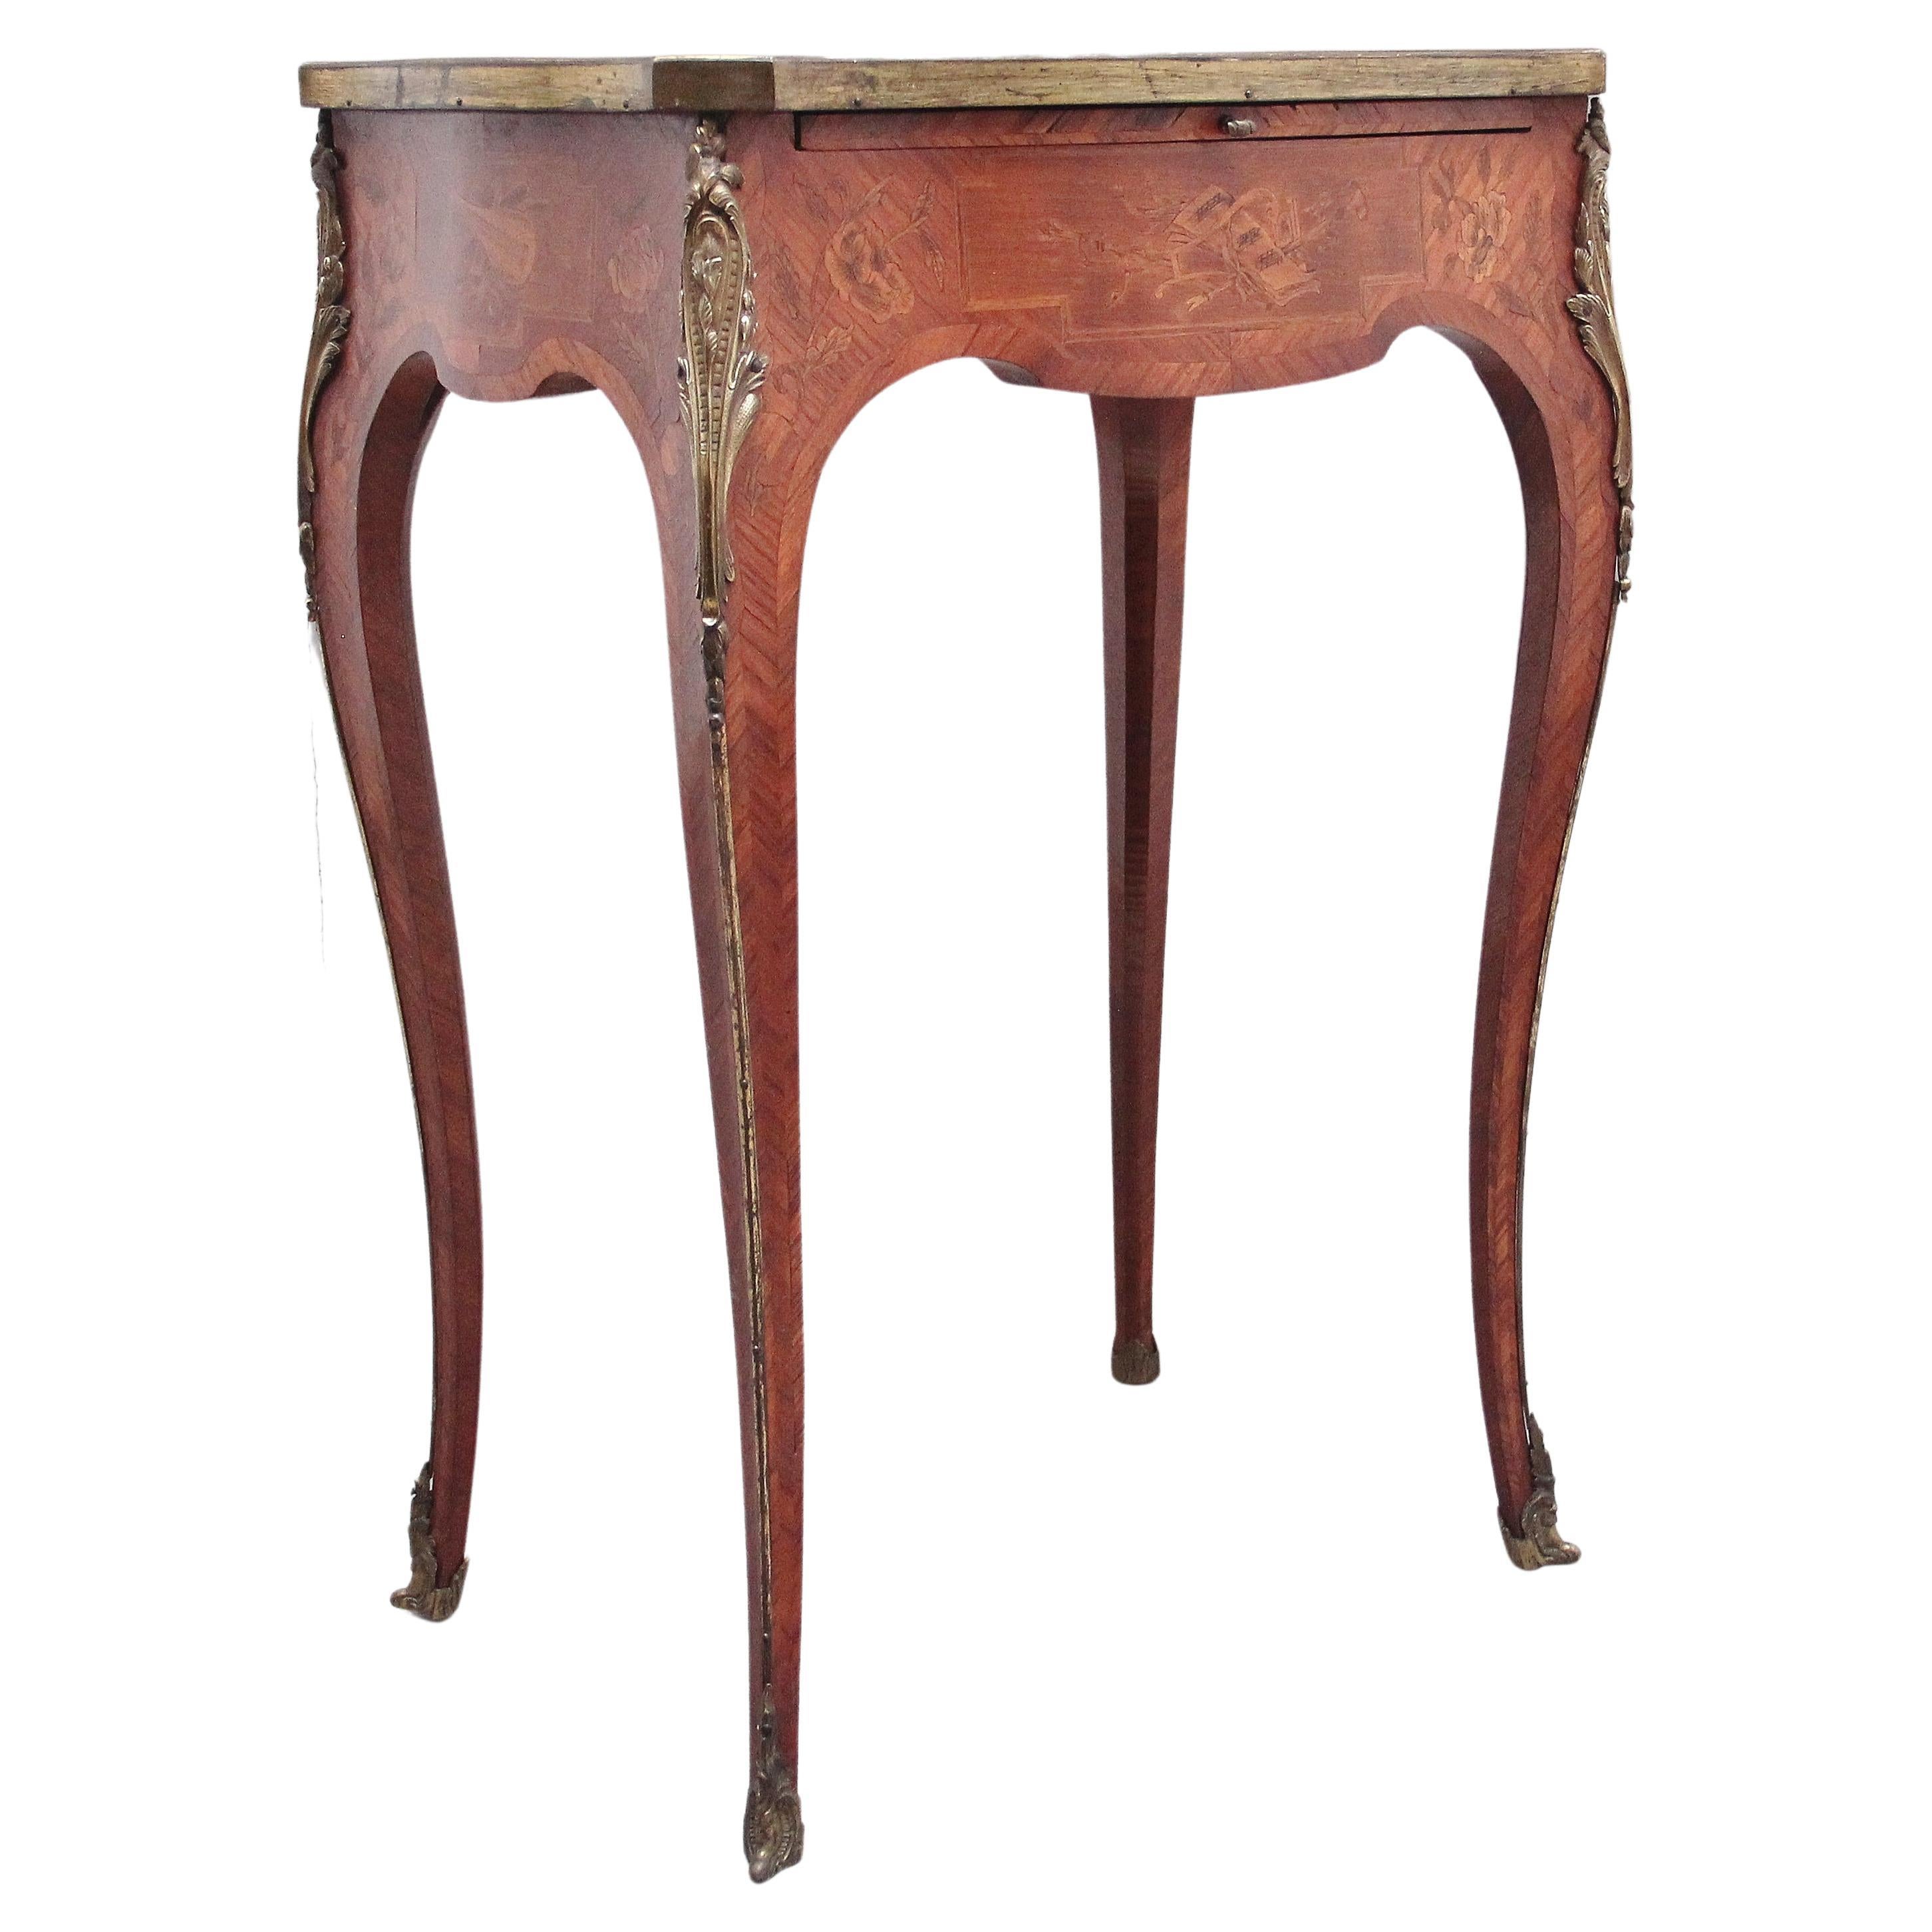 Early 20th Century French Kingwood and Marquetry Side Table For Sale